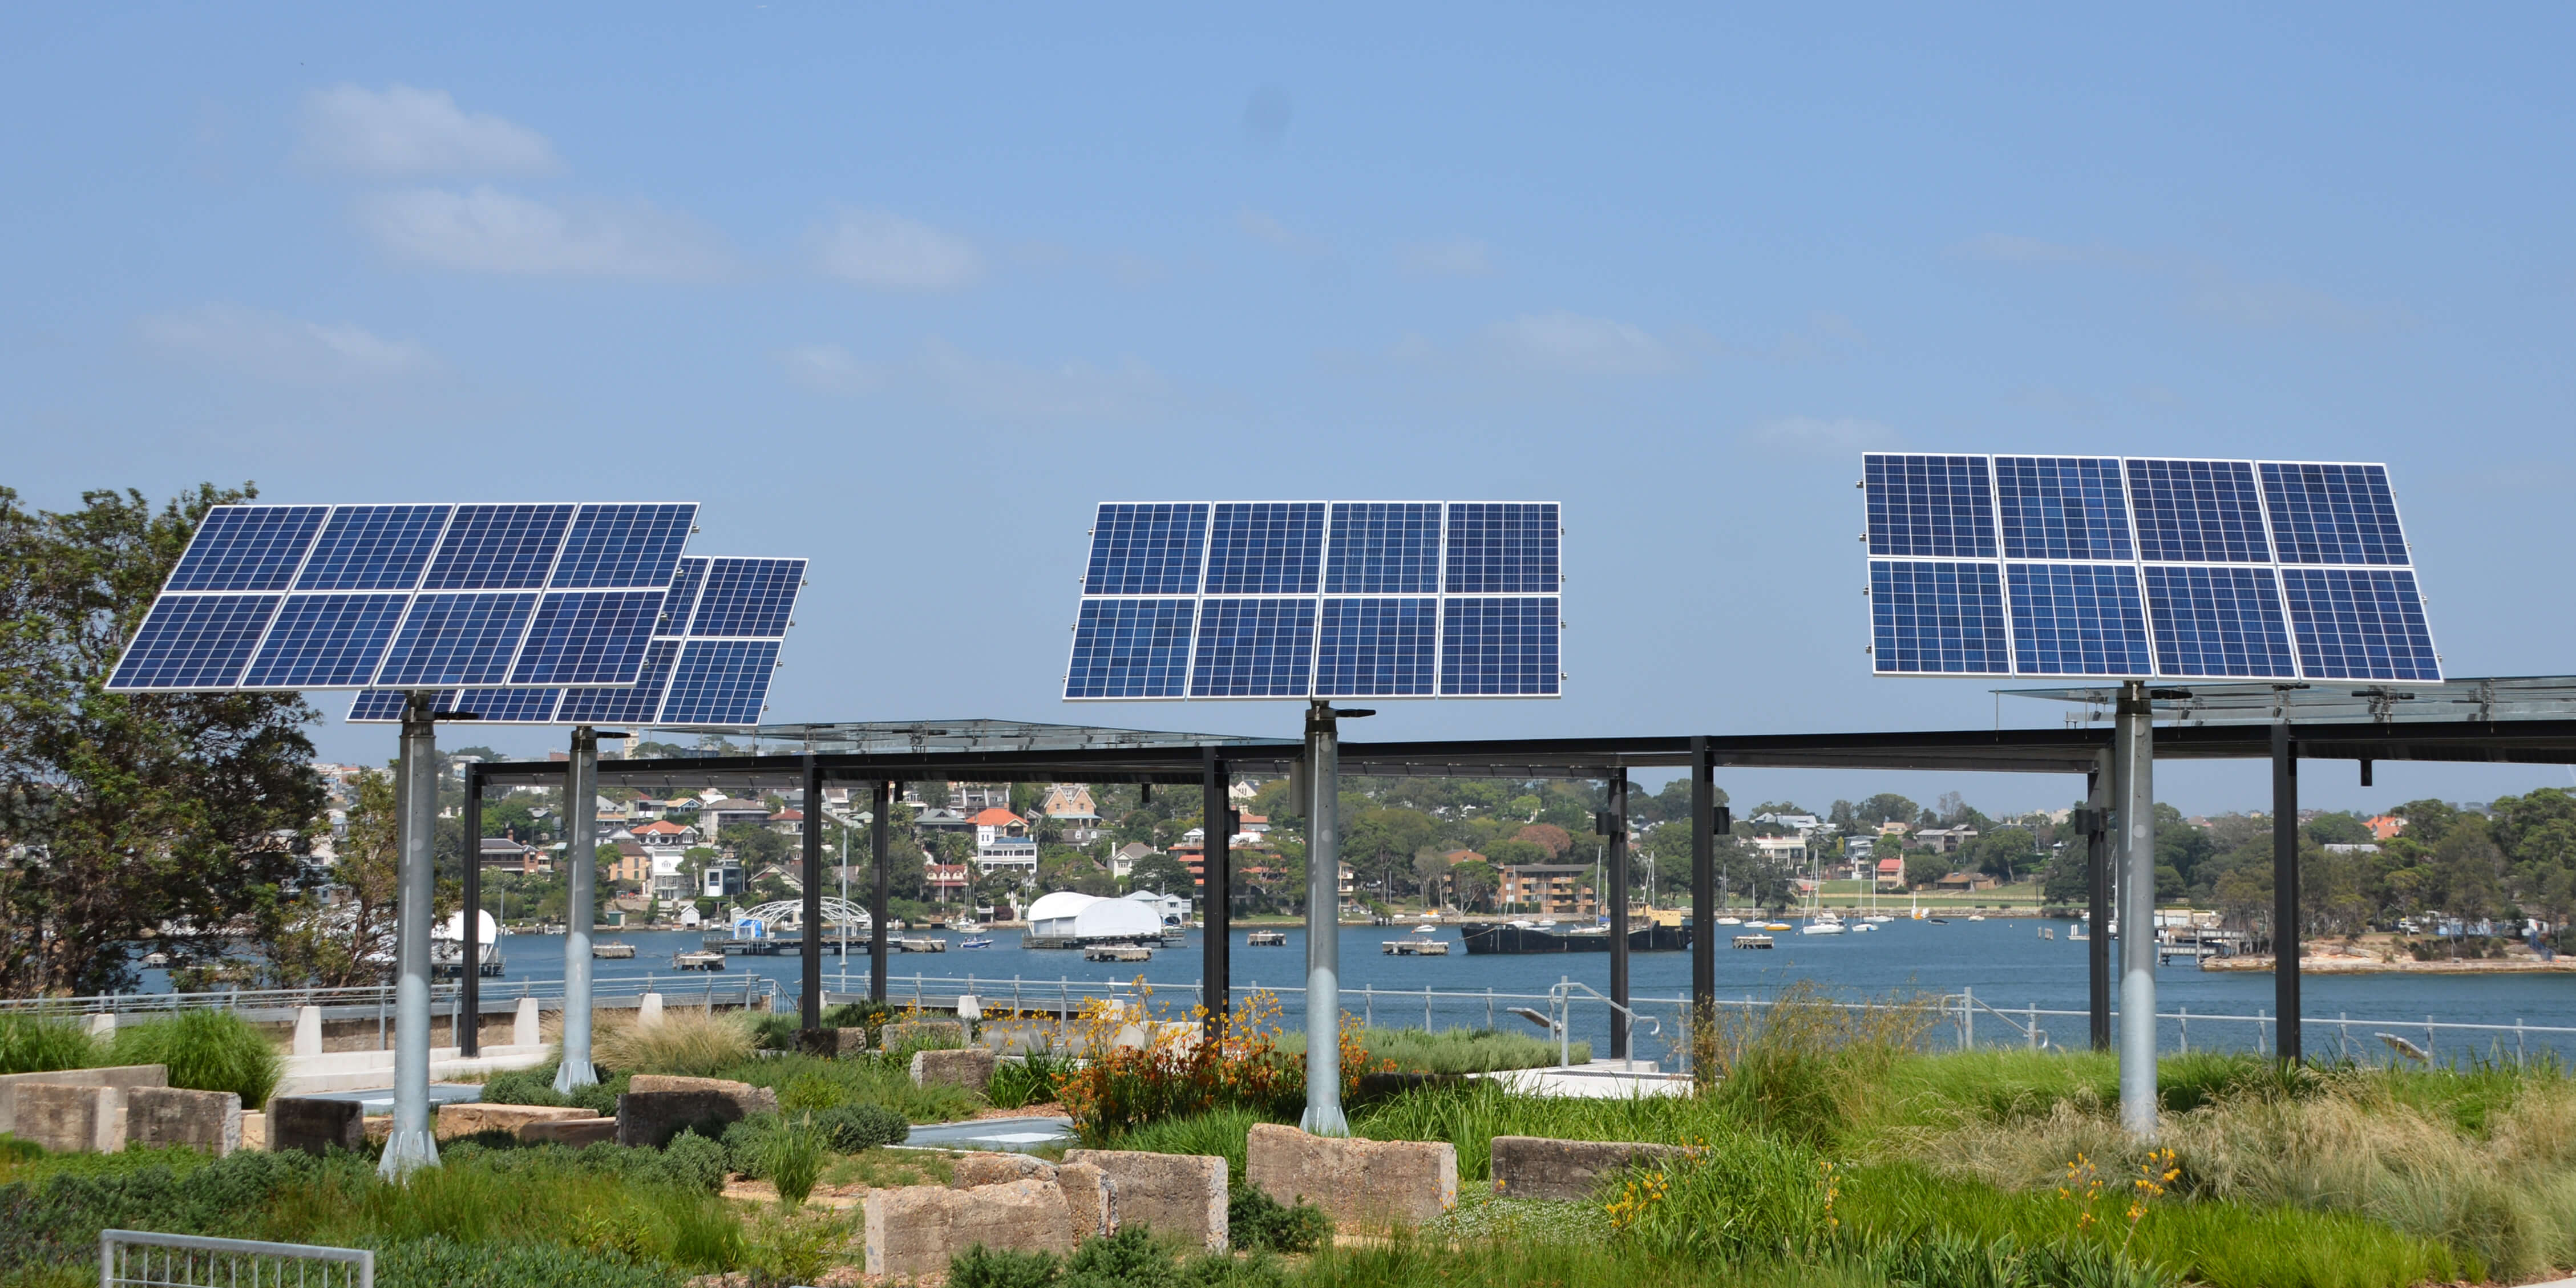 Four large solar panels located in a community garden with Sydney Harbour in the background